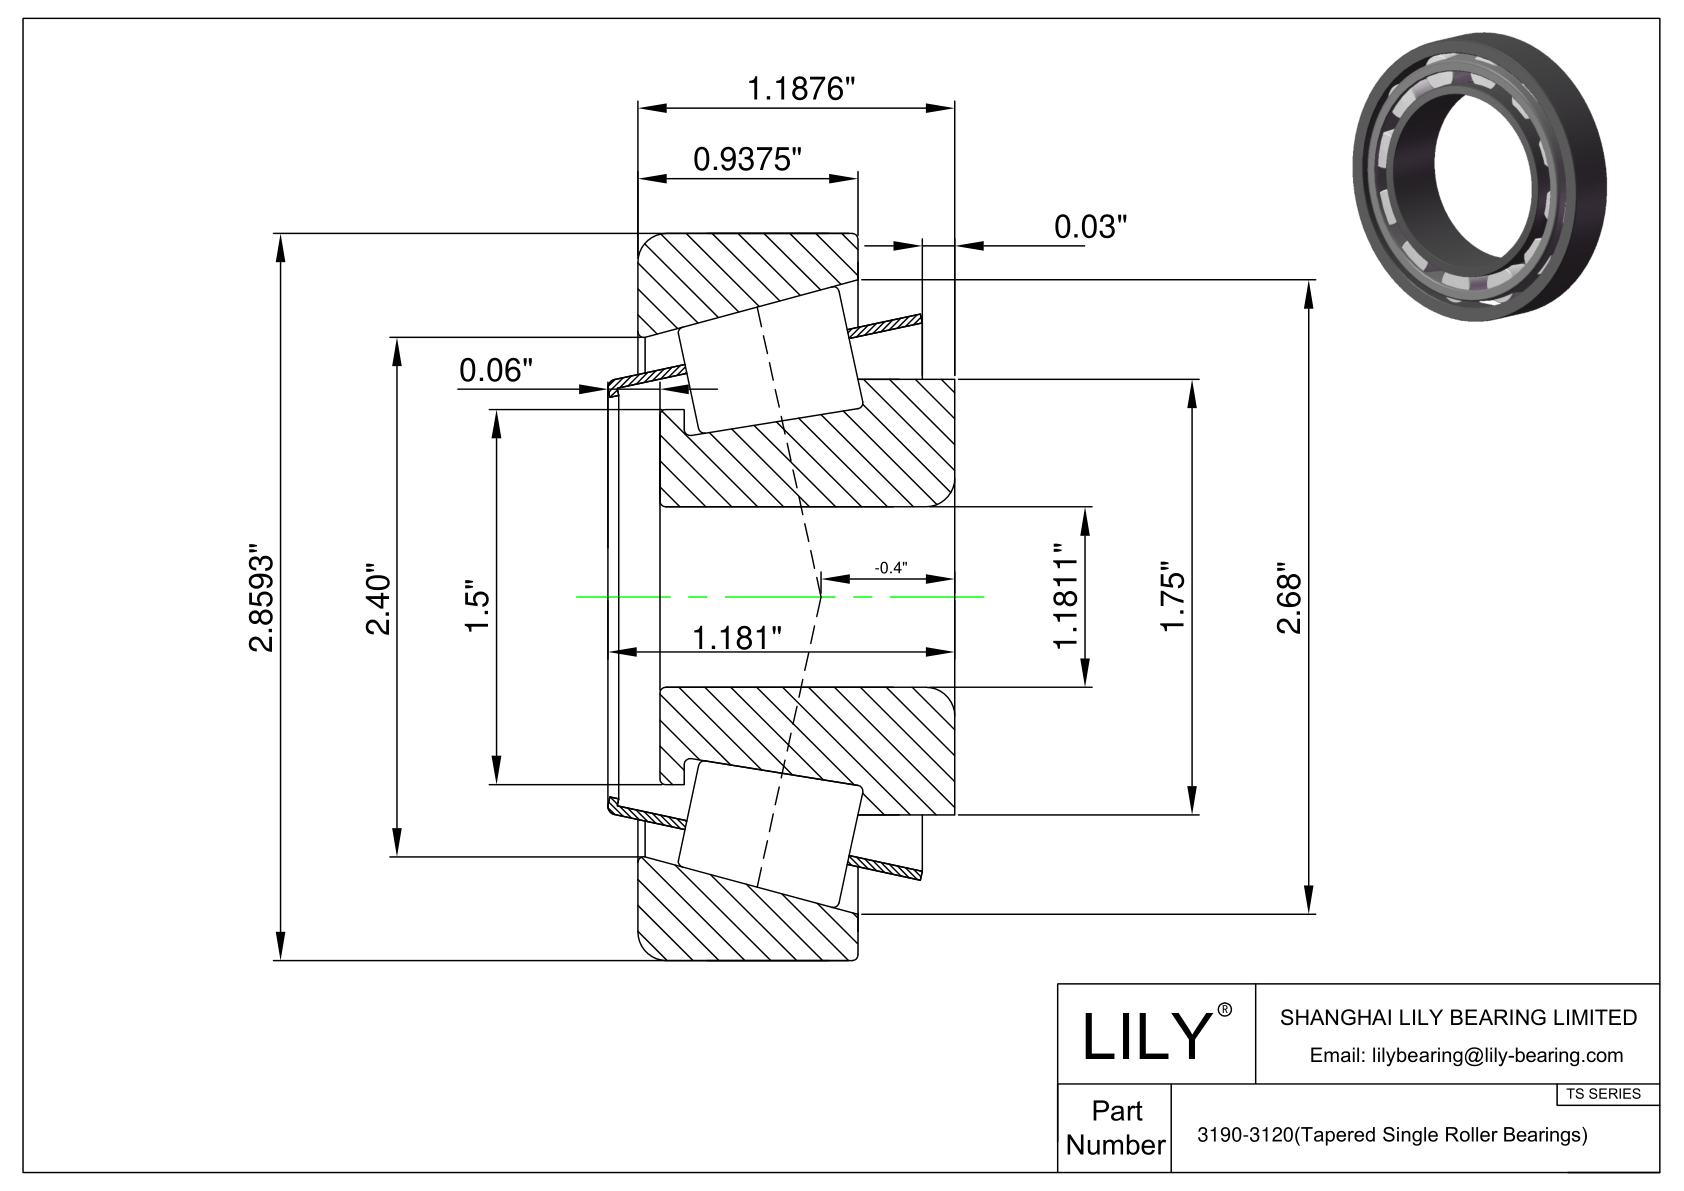 3190-3120 TS (Tapered Single Roller Bearings) (Imperial) cad drawing